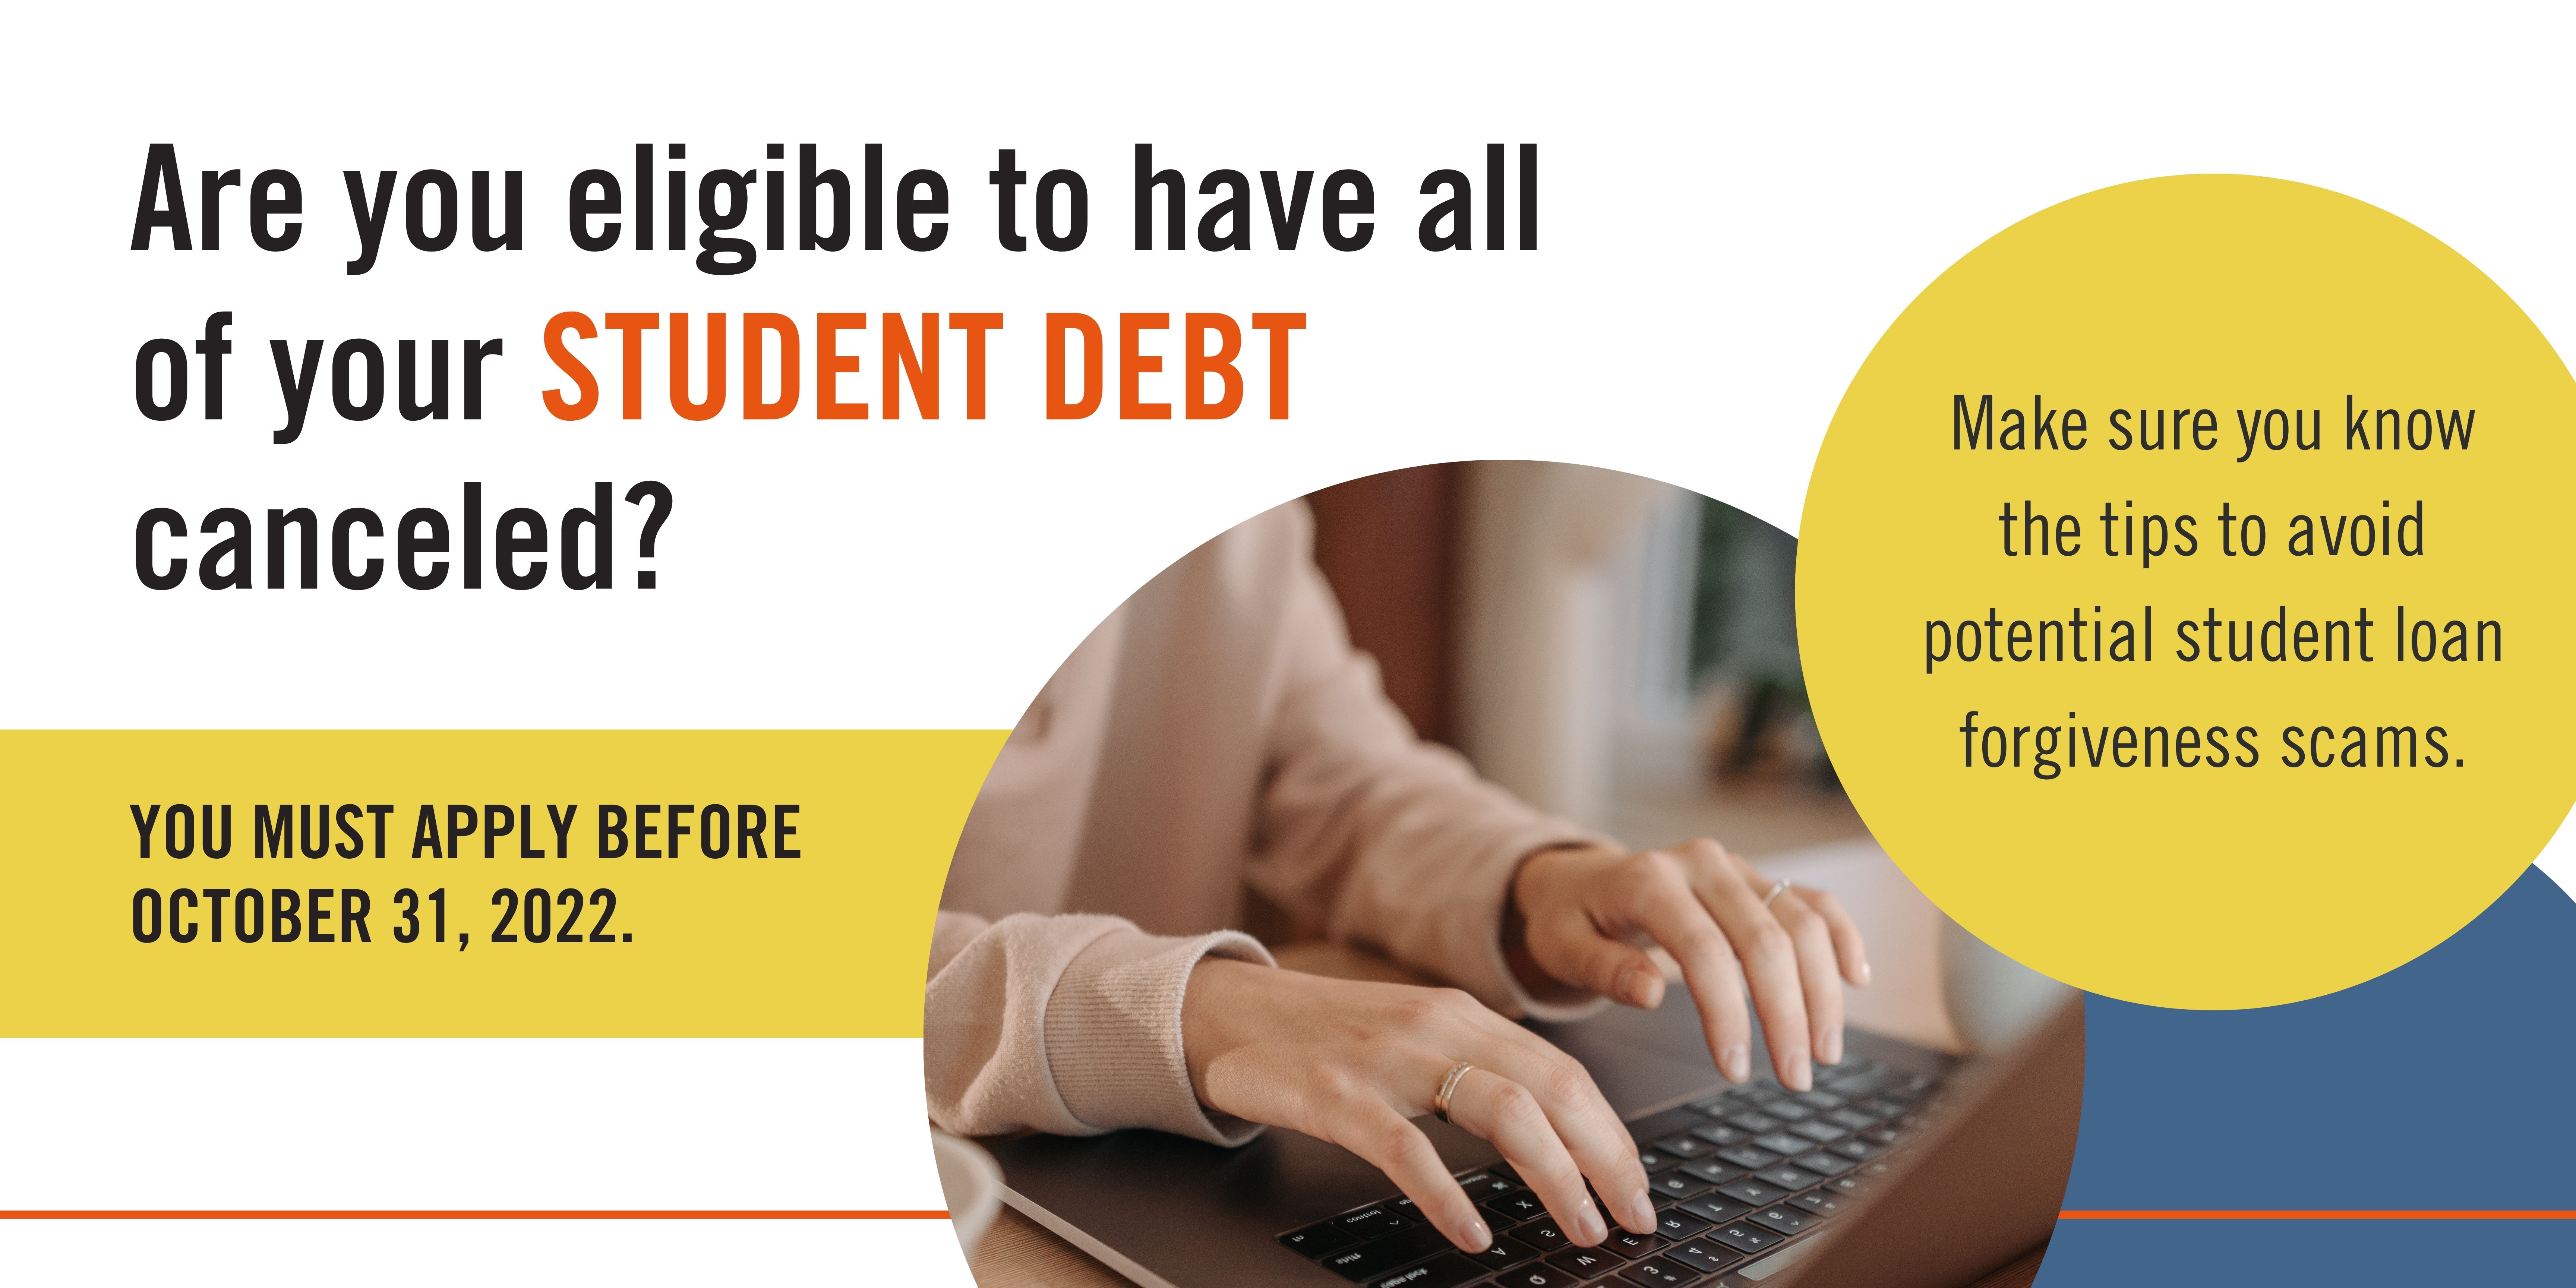 Blog banner saying "Are you eligible to have all of your student debt canceled? Apply by October 31st! Make sure you know the tips to avoid student loan forgiveness scams!"